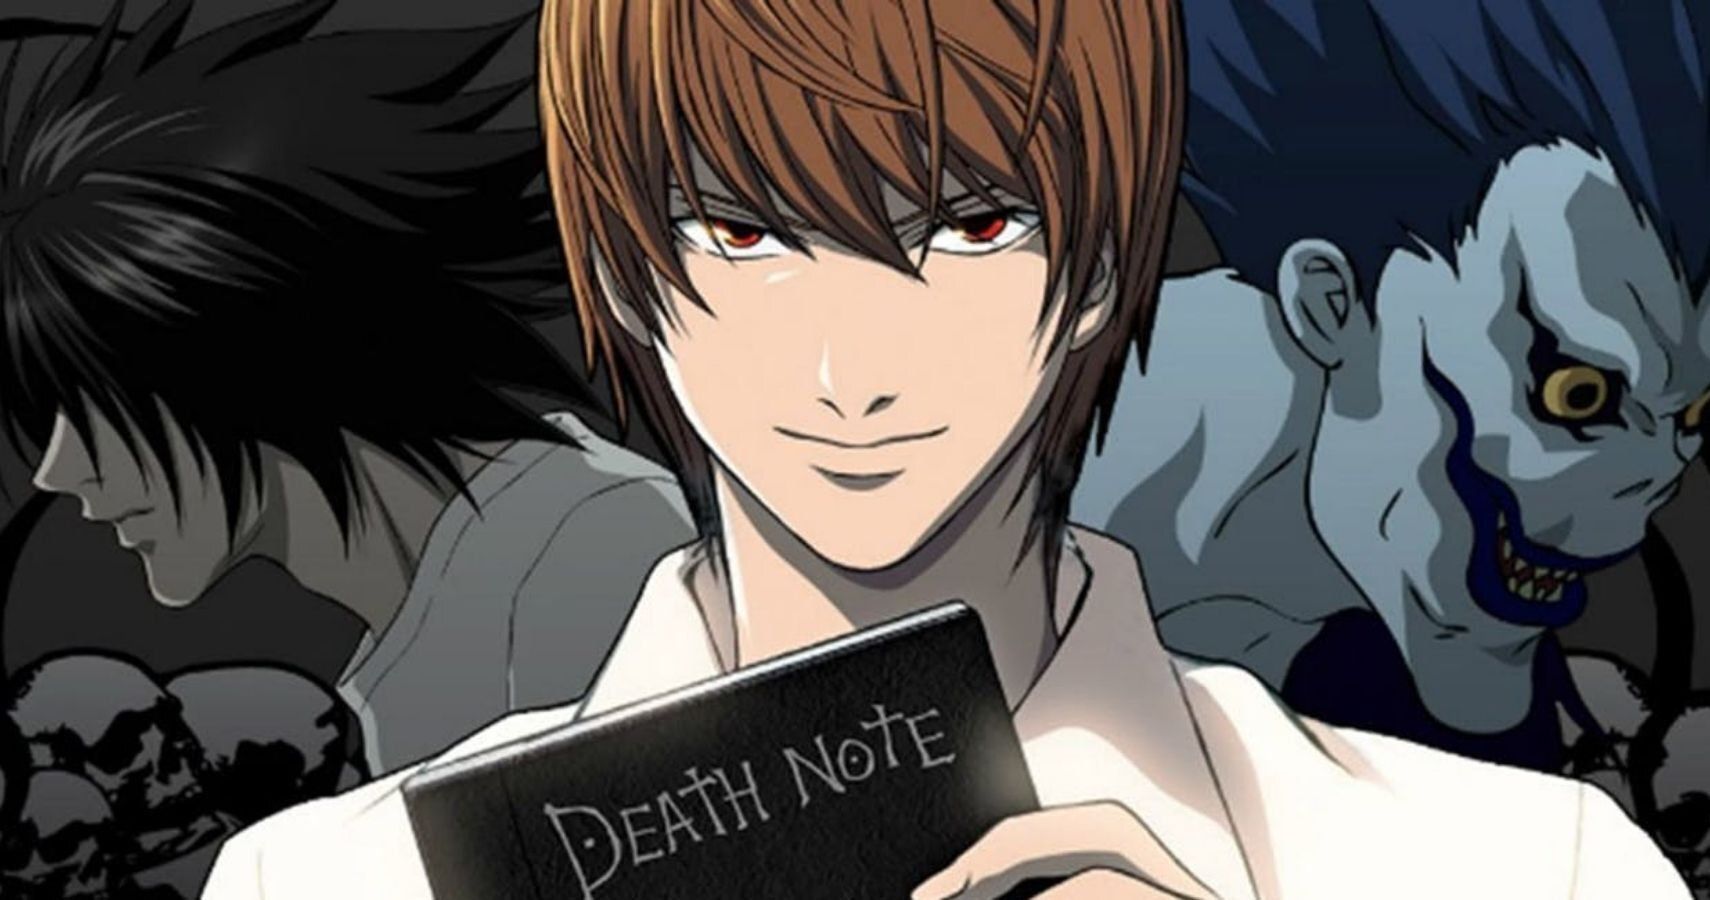 120 death note rules